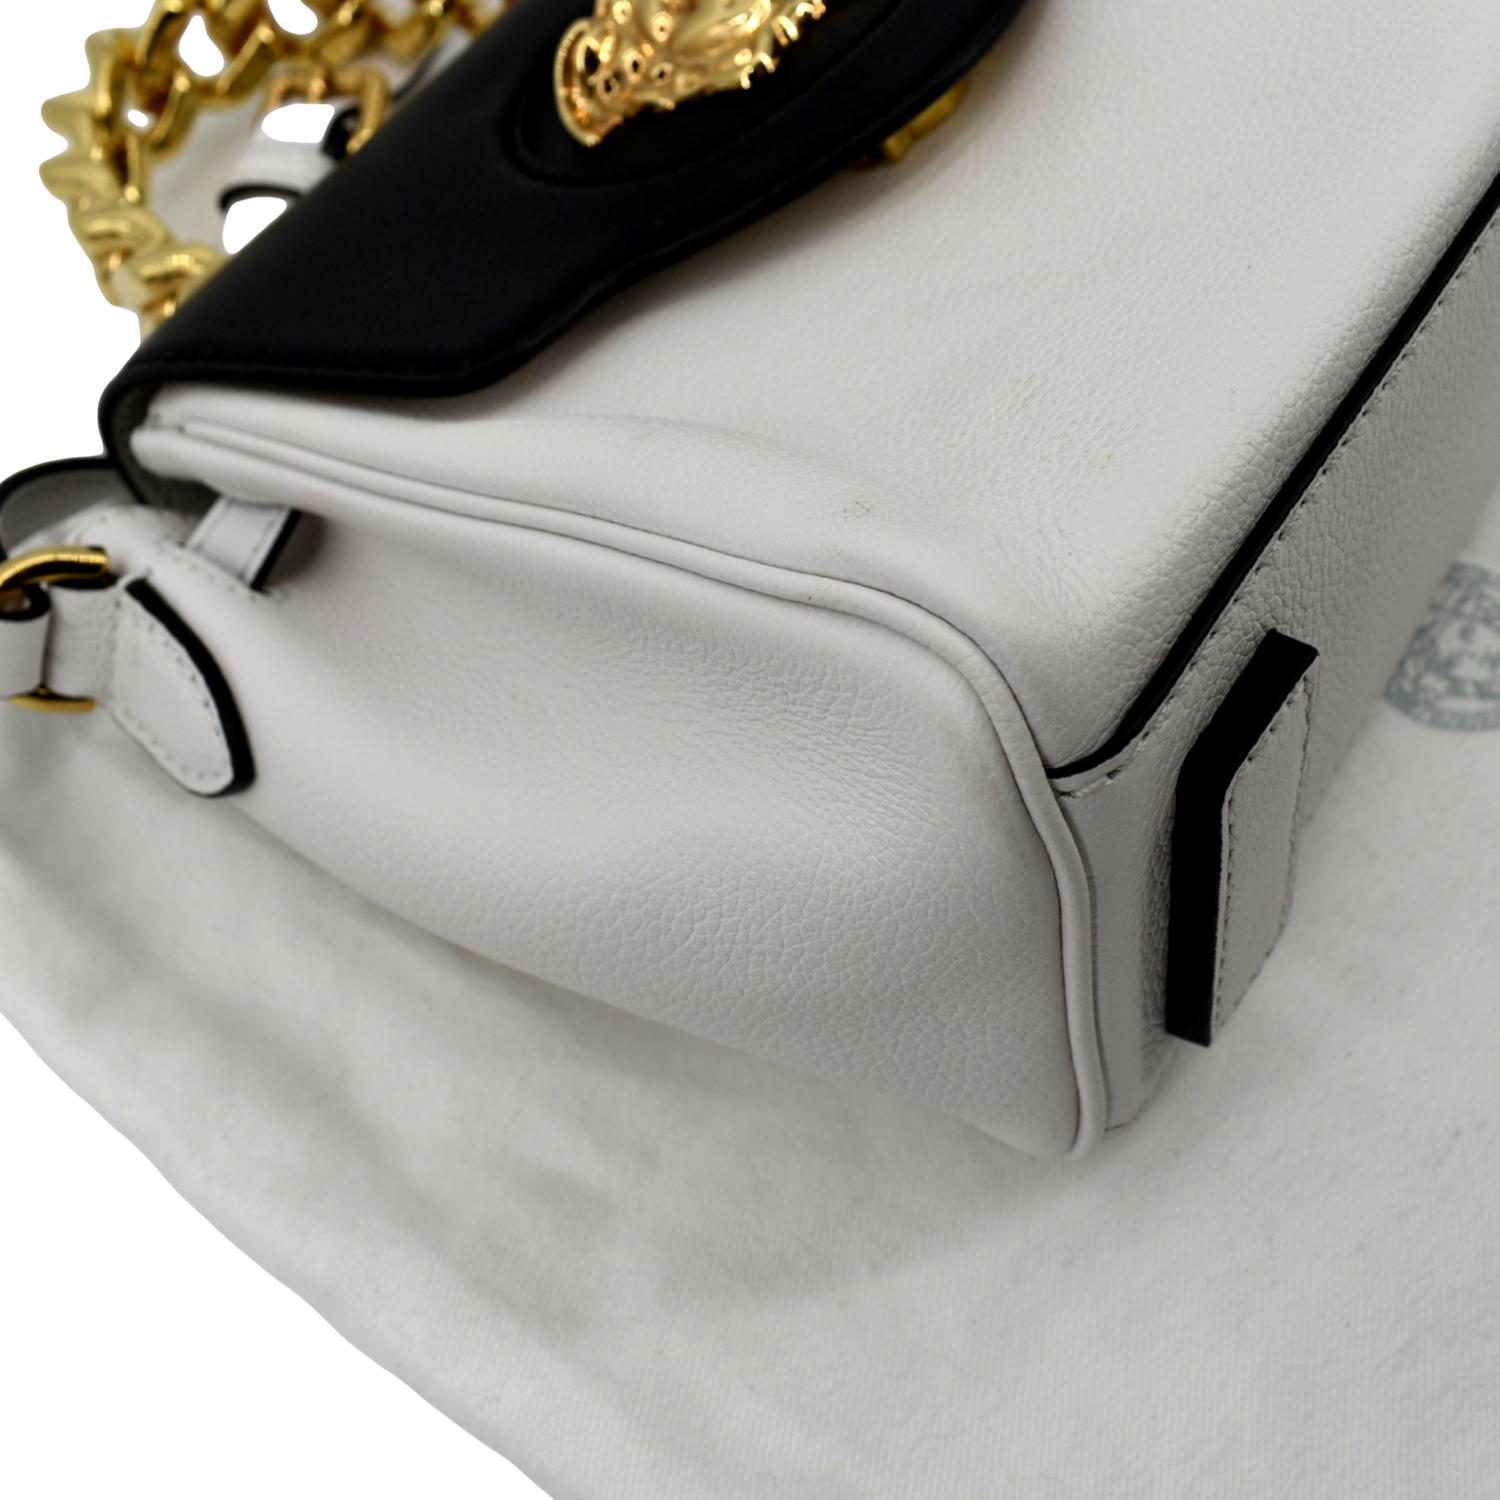 Handling it with care - the La Medusa Top Handle Bag from Versace.  Impeccable service, every time. #AmericanaManhasset